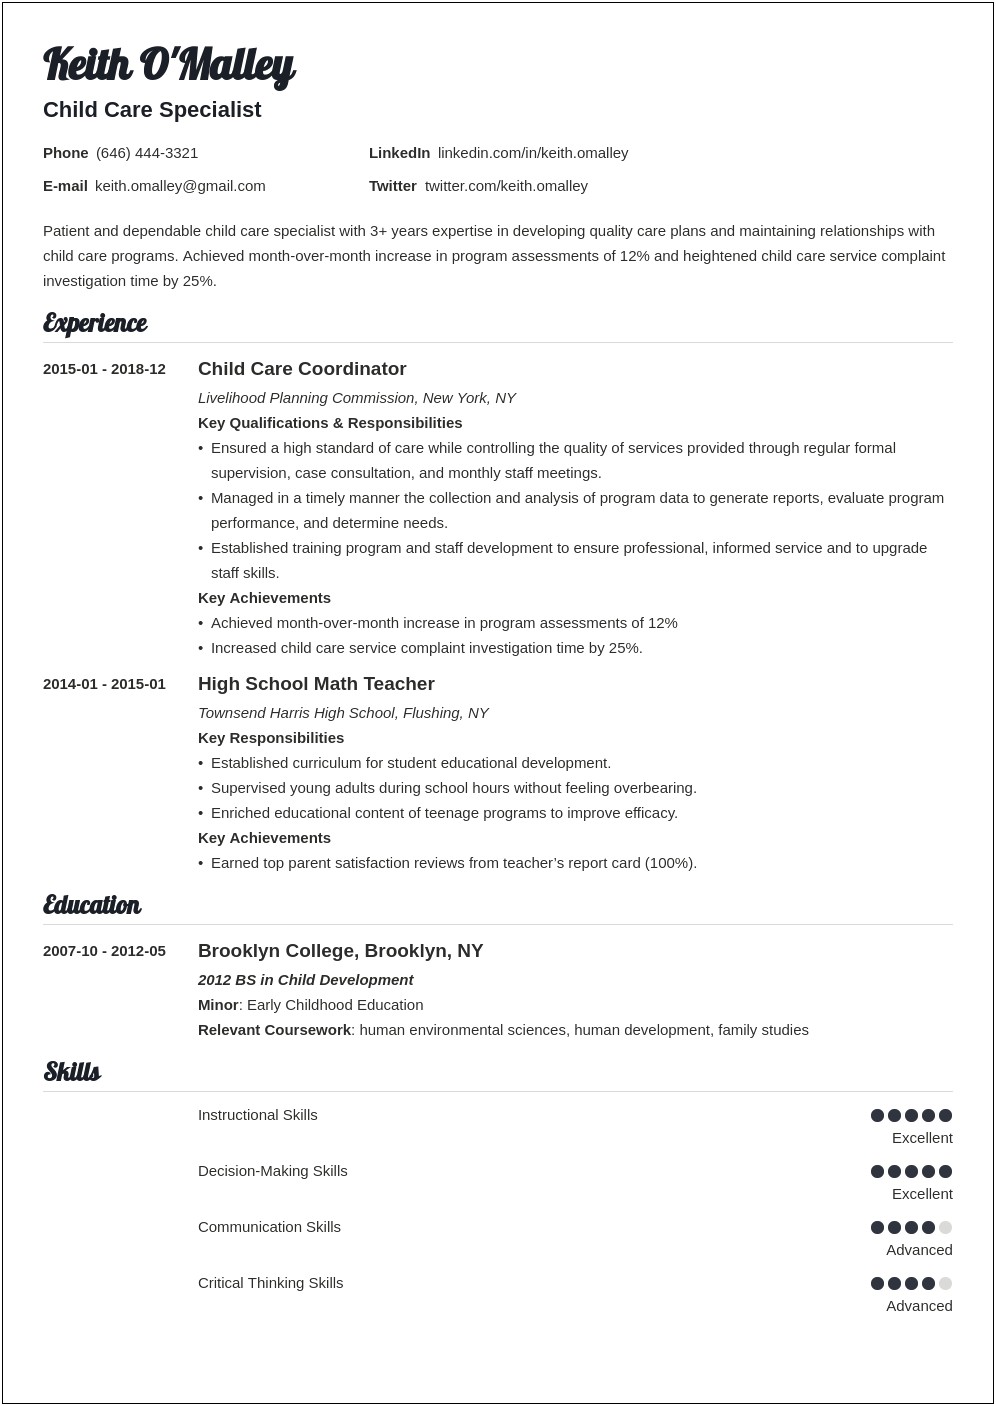 Child Care Resume Career Objective